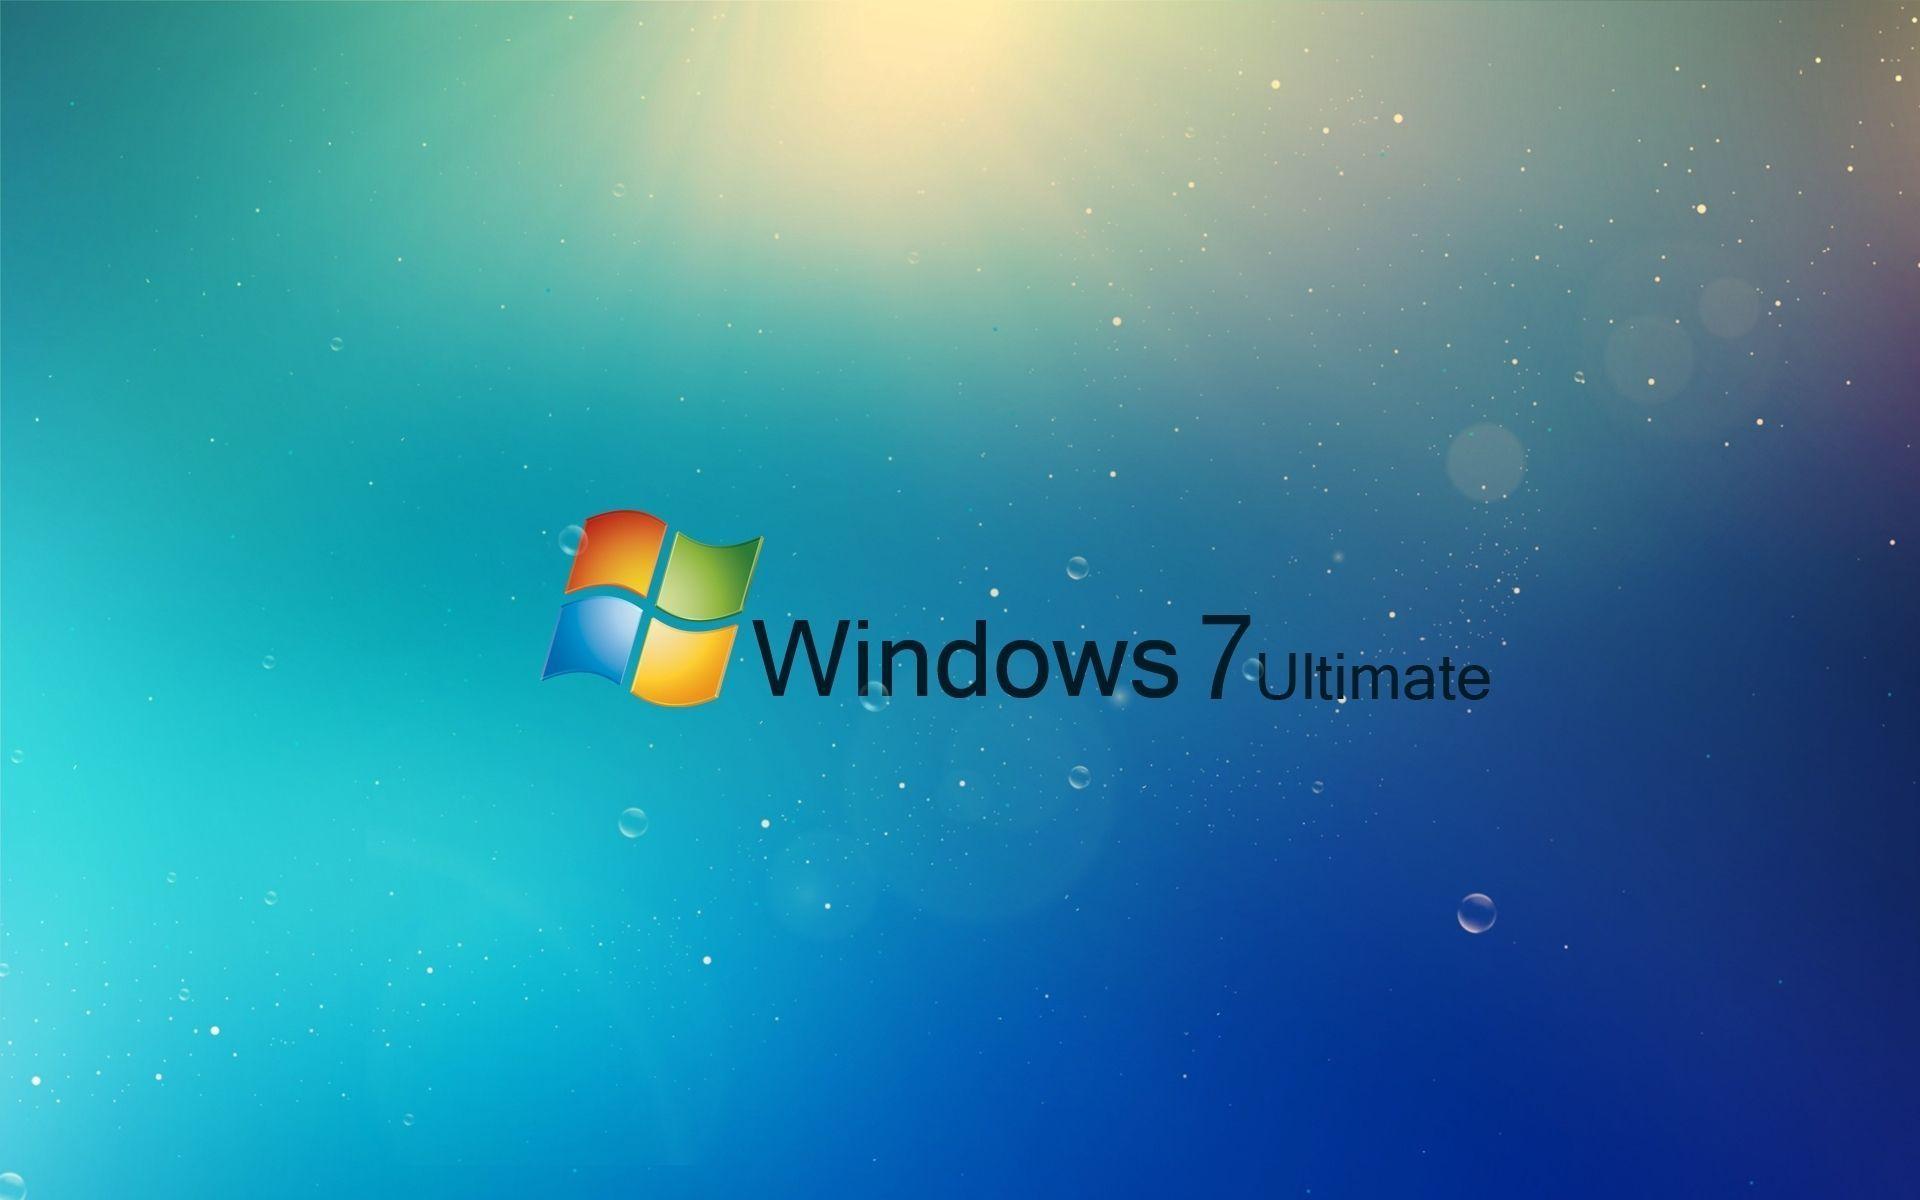 Windows 7 Ultimate Logo - pic new posts: Wallpaper Hd Win 1920×1200 Windows 7 New Wallpapers ...